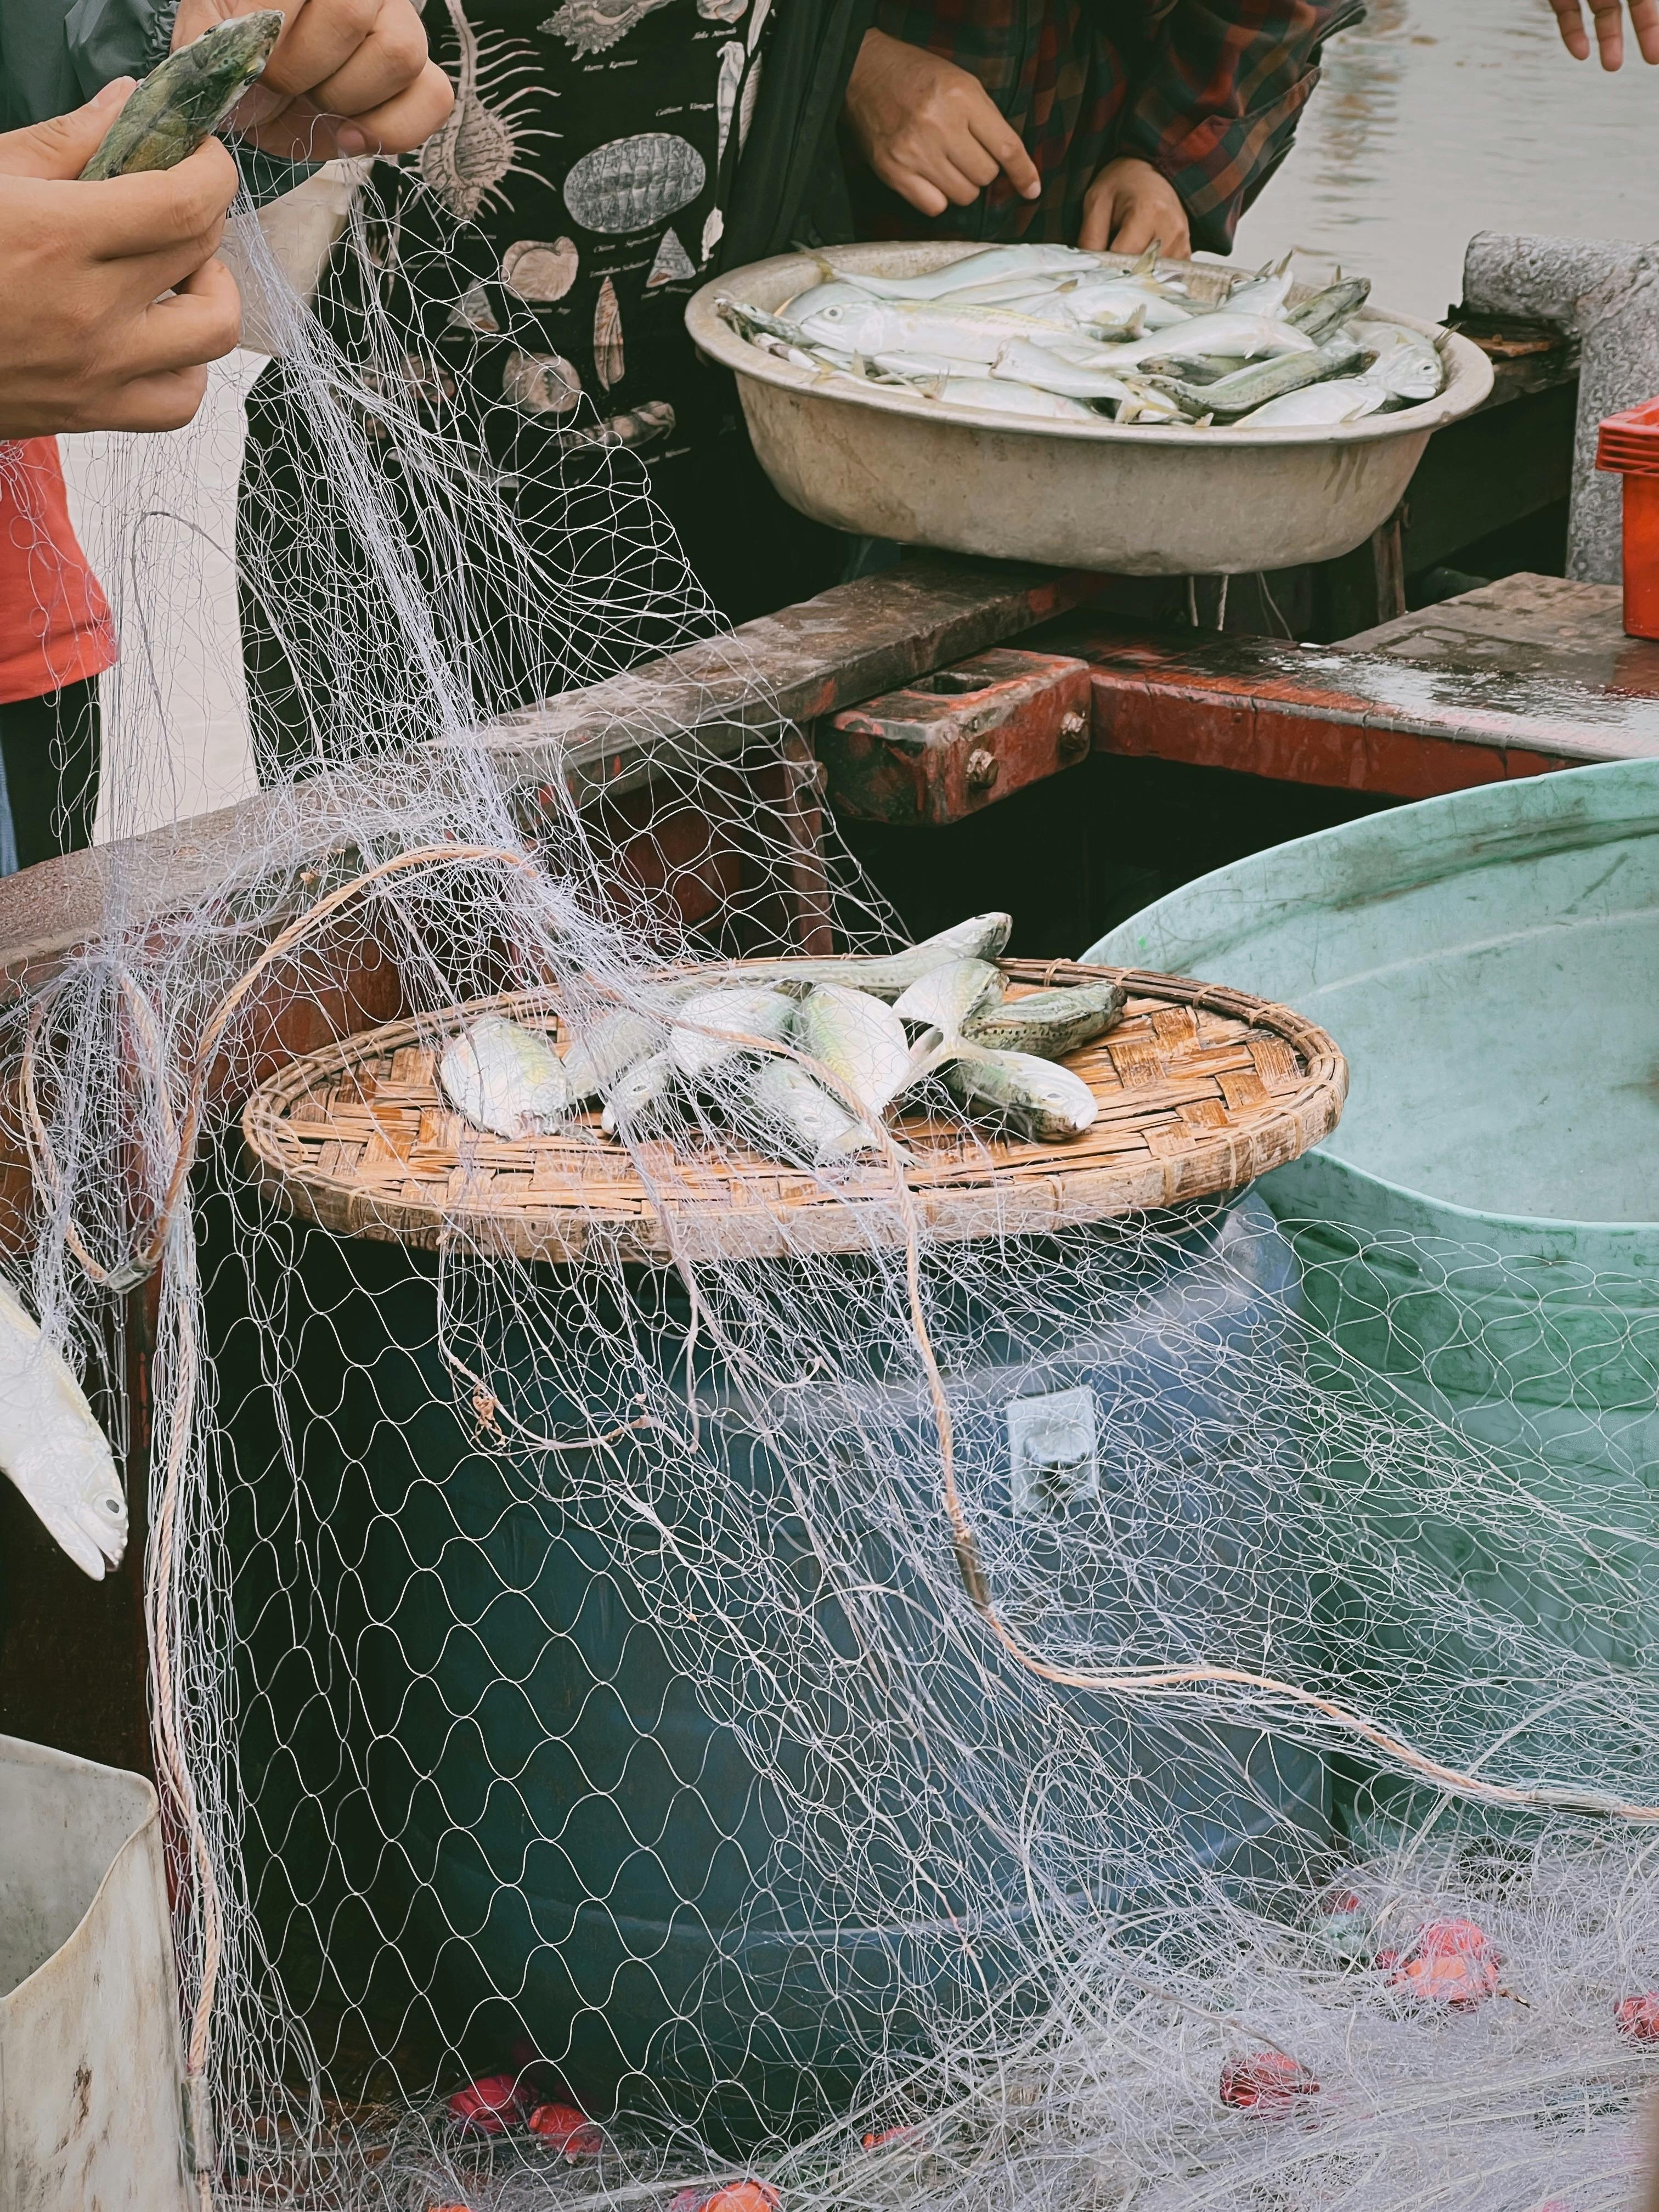 Hands of Fishermen Working with Nets and Fish · Free Stock Photo